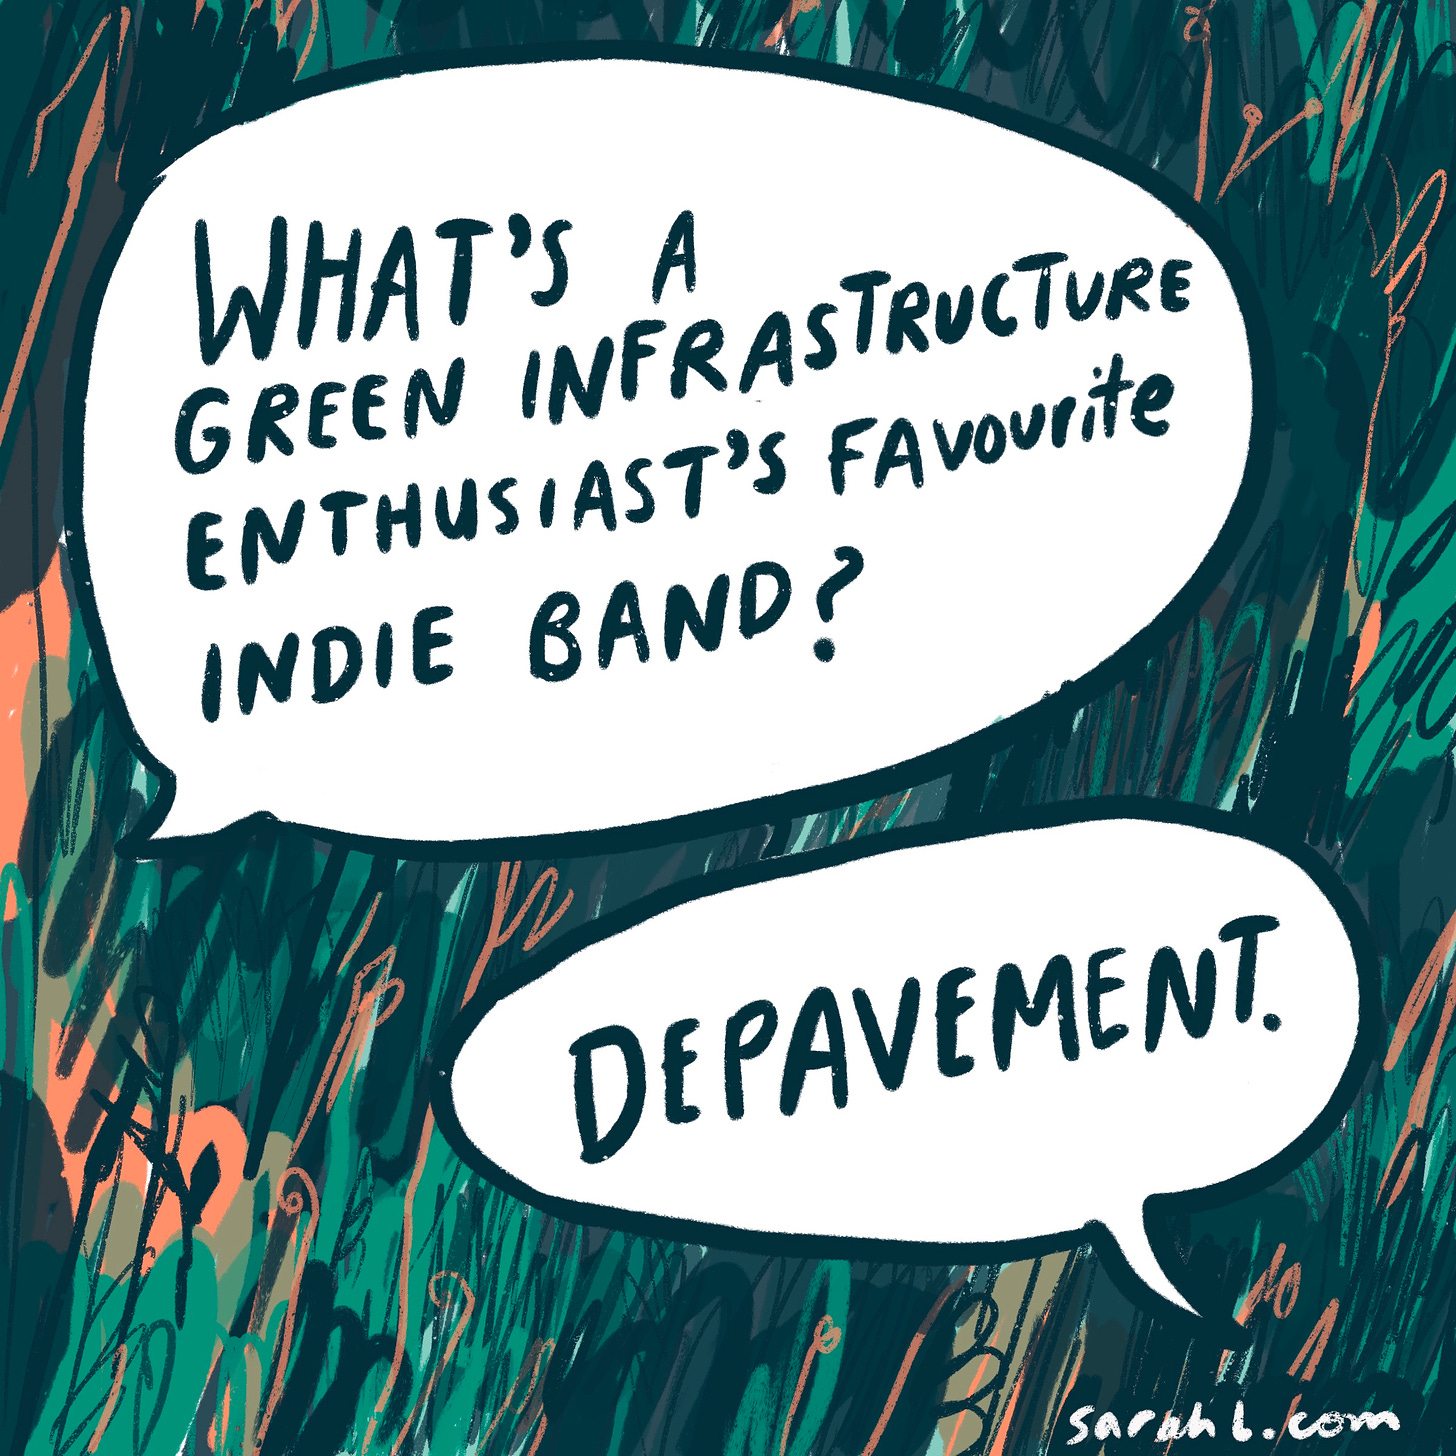 Two illustrated conversation bubbles. The top bubble is larger and reads: What's a green infrastructure enthusiast's favorite indie band? The bottom bubble reads: Depavement. The background is dark and light green, with pencil-like lines of orange throughout, suggesting tall grasses. 